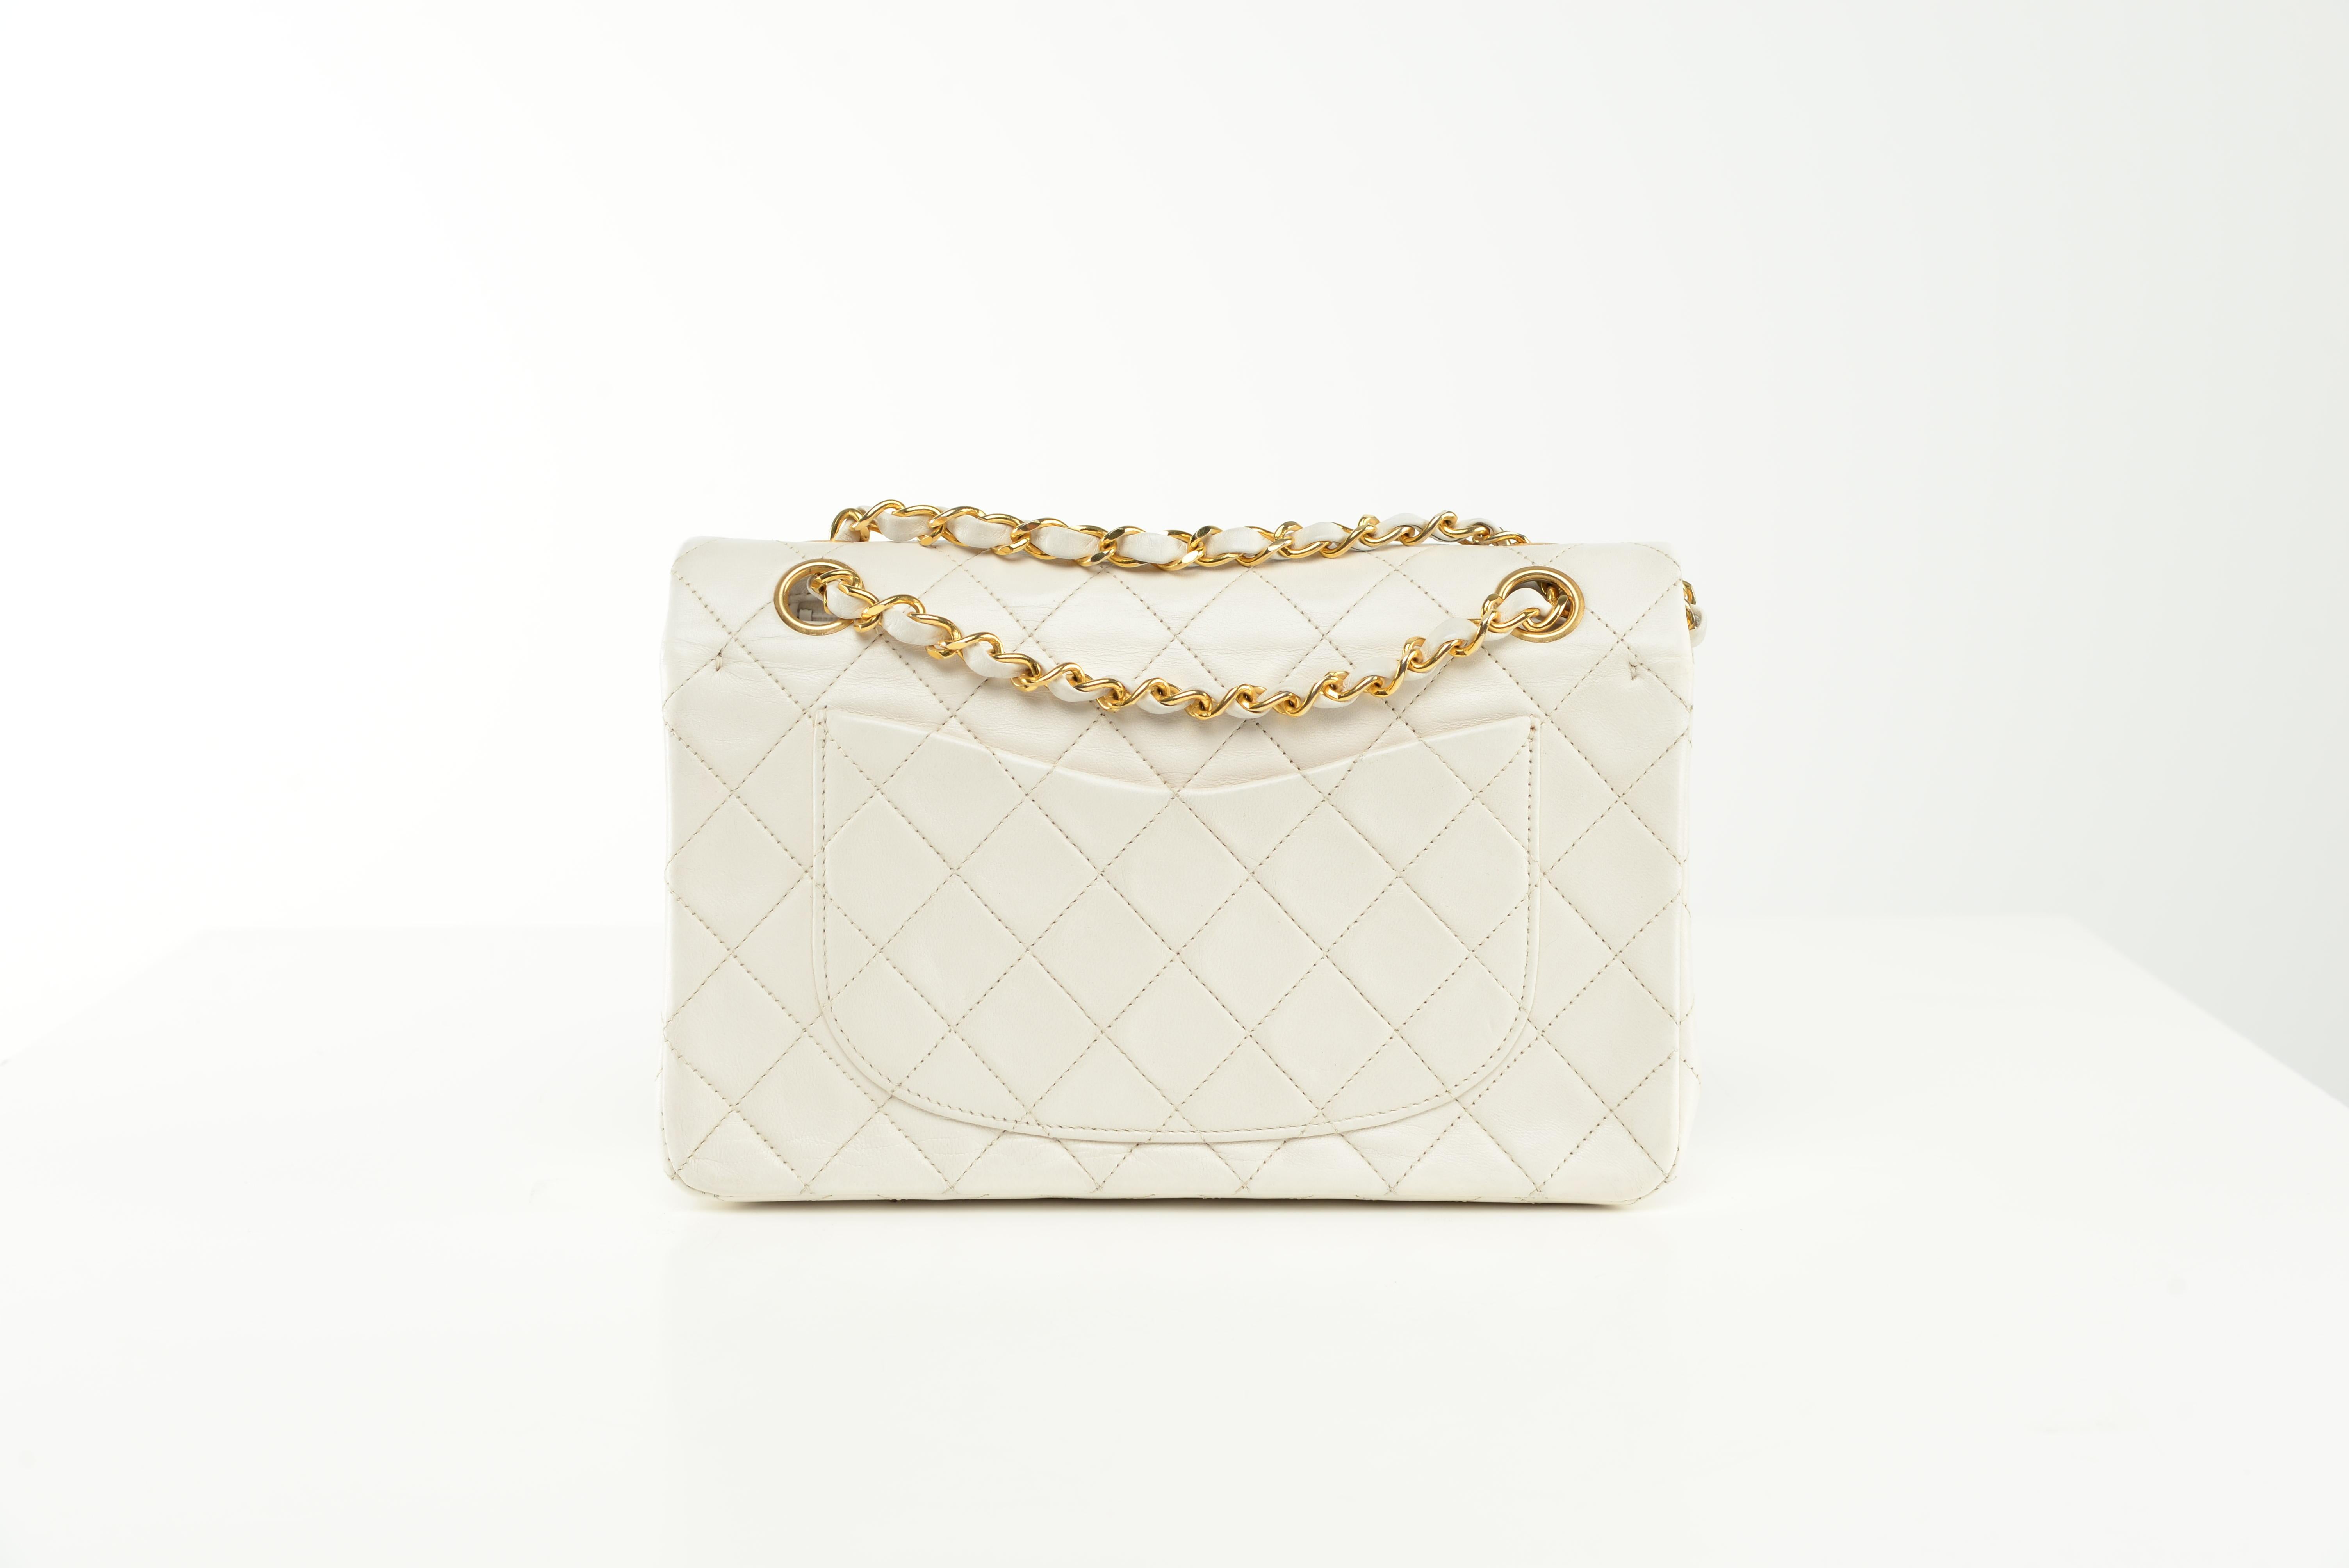 Women's or Men's Chanel Classic Flap Small White Lambskin Gold Vintage